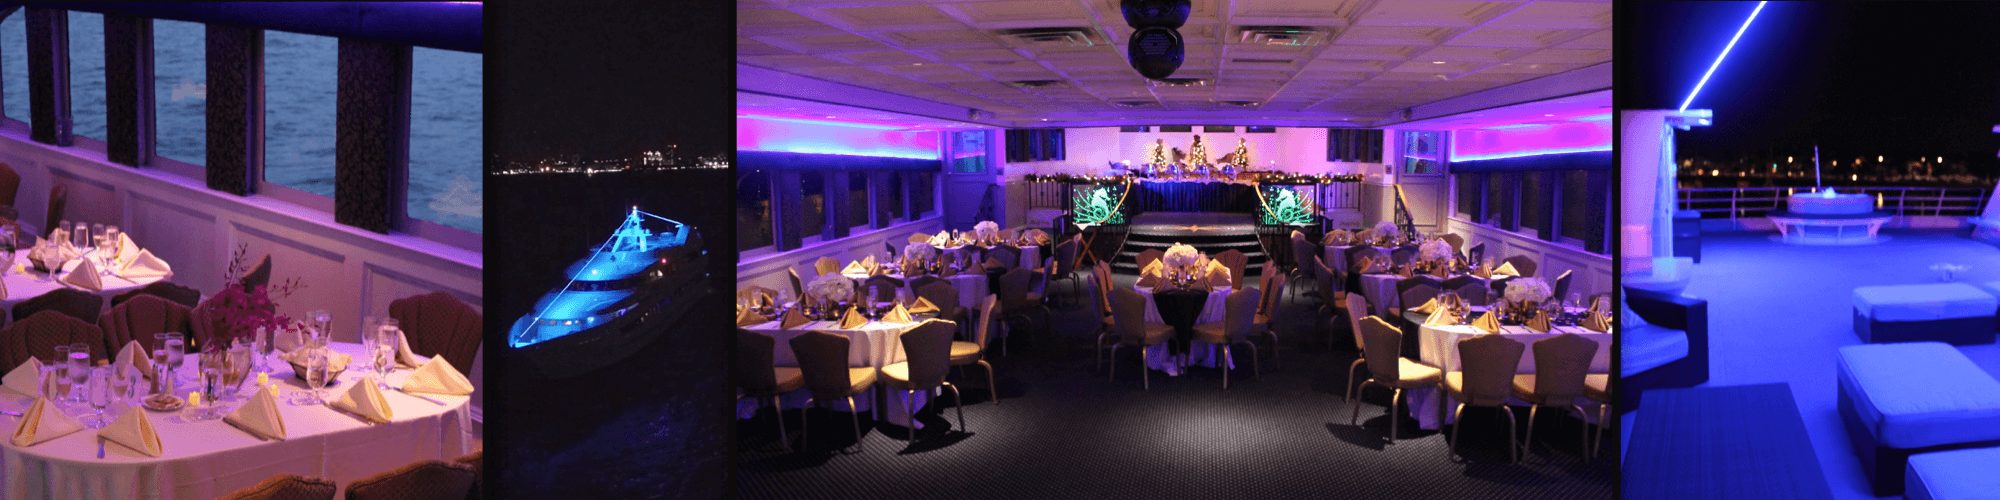 Private Events on the Yacht Charter Atlantis